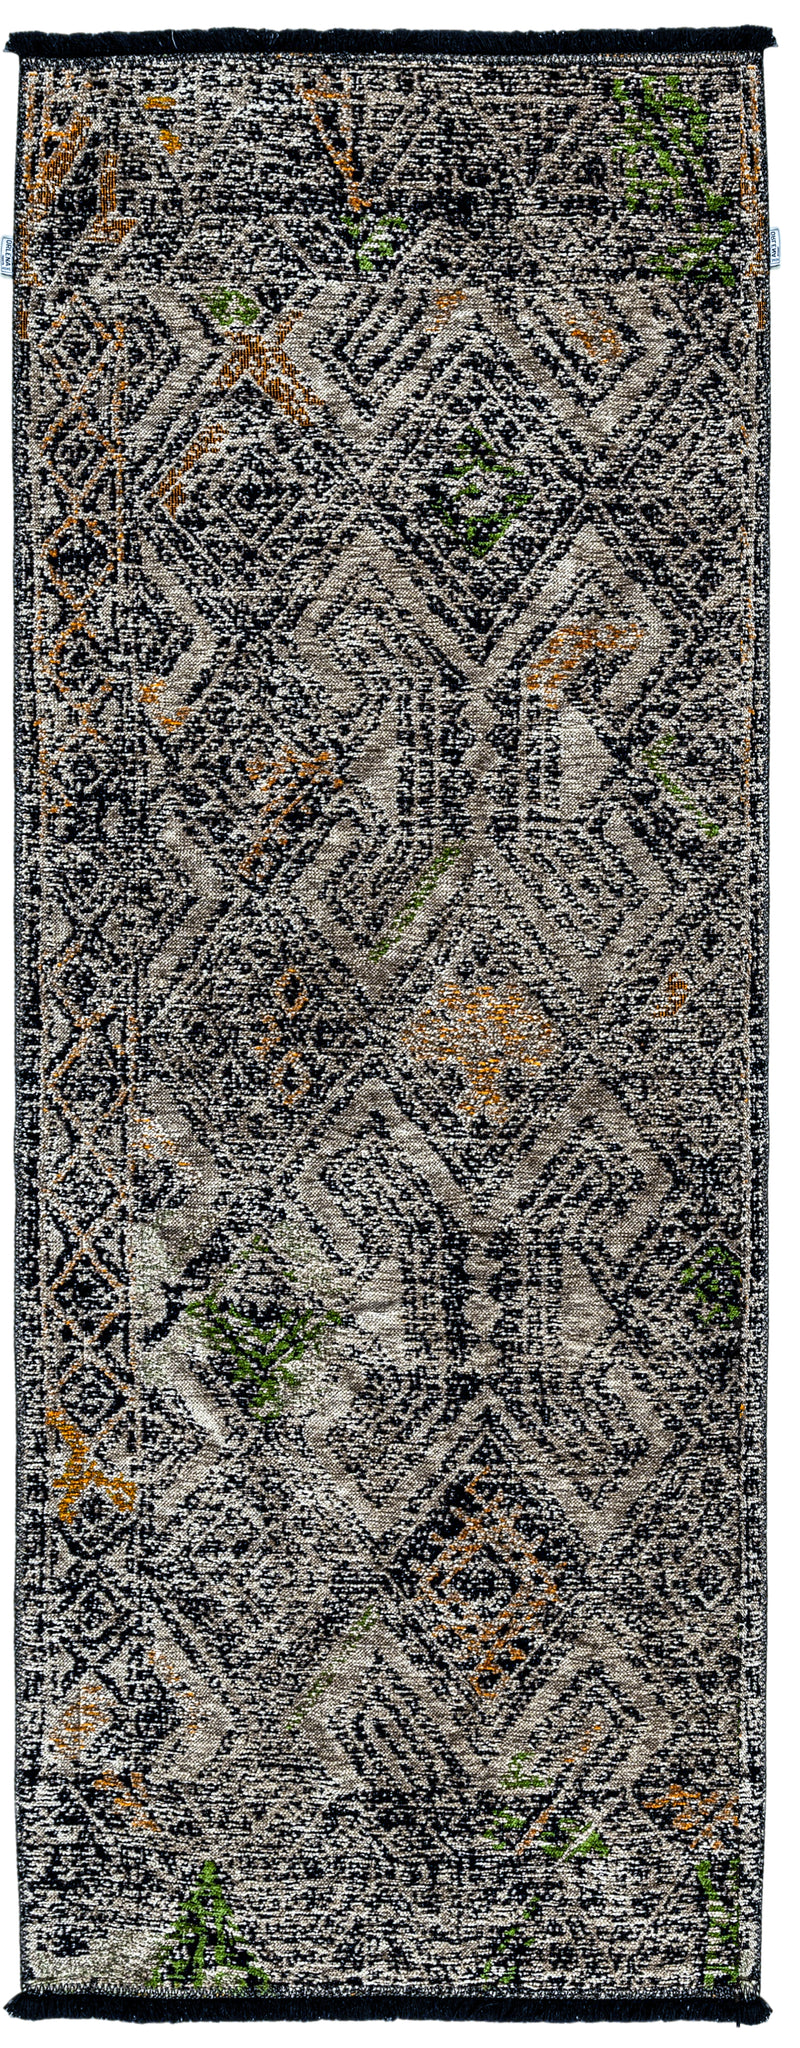 Washable Area rug | Simon & Yildirim Ease of Elegance Trek | Beige & Black Abstract | 3x8 | By MotherRuggers.com | Machine Washable | Jacquard Woven | Pet Friendly | Kid Friendly | Machine Wash | Line Dry | Living Room | Covered Patio | Entry Way | Bedroom | High-Traffic | Two-year warranty with proper care | Shake or light Vacuum | Machine Wash as needed | Dry Flat or Line Dry | Dries fast